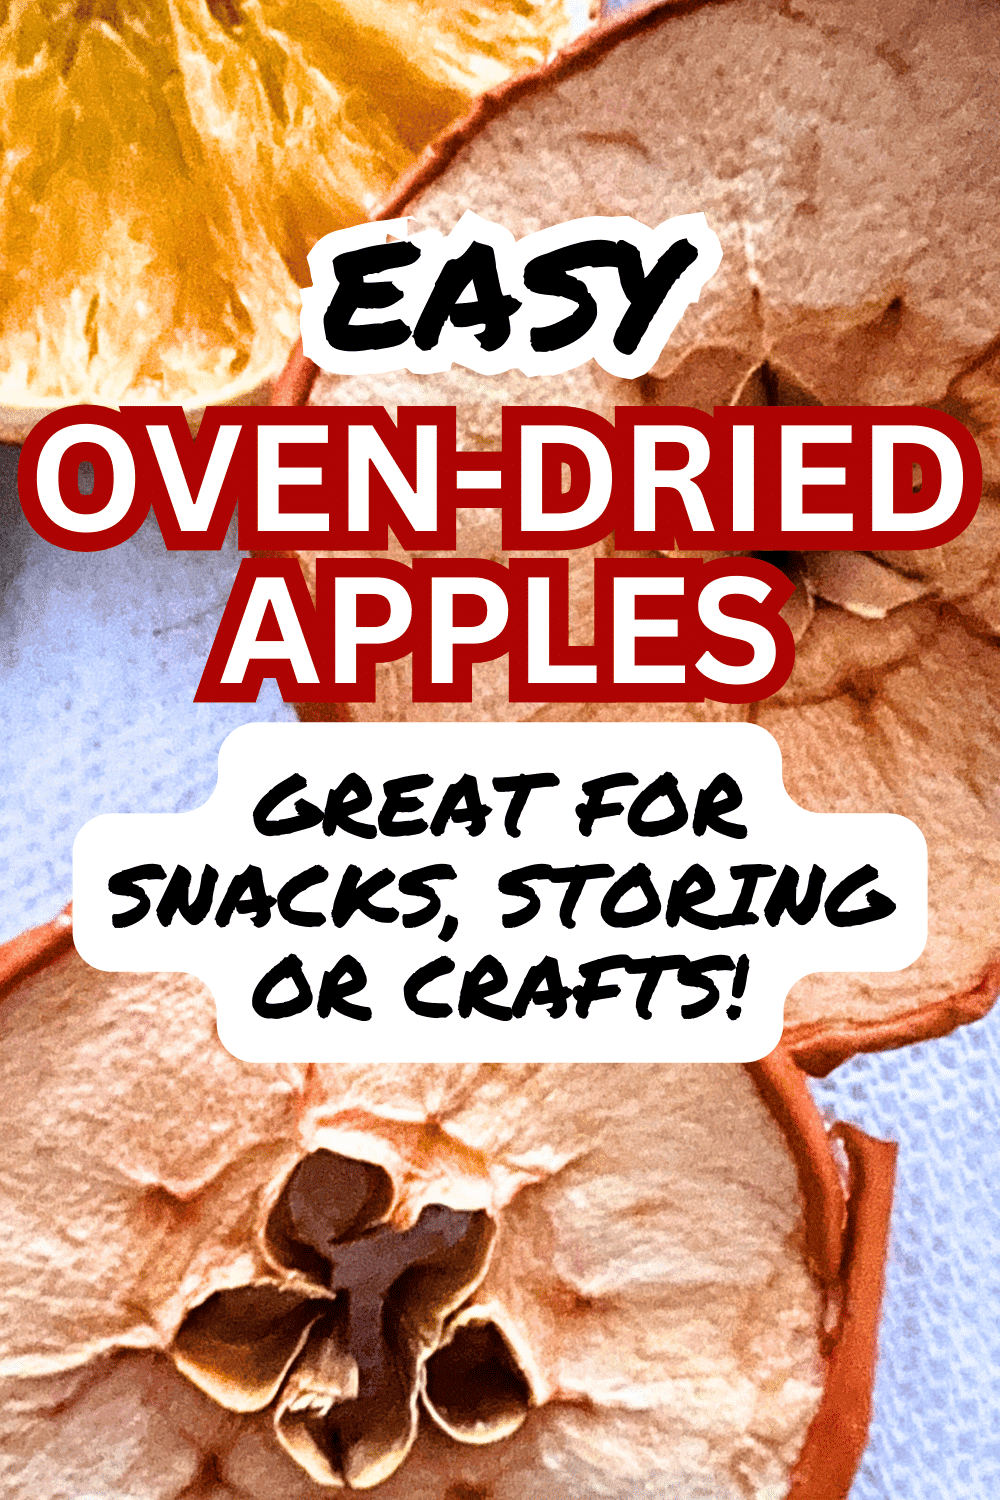 How To Dry Apples In The Oven - DRIED APPLE RINGS WITH TEXT OVER THE APPLES